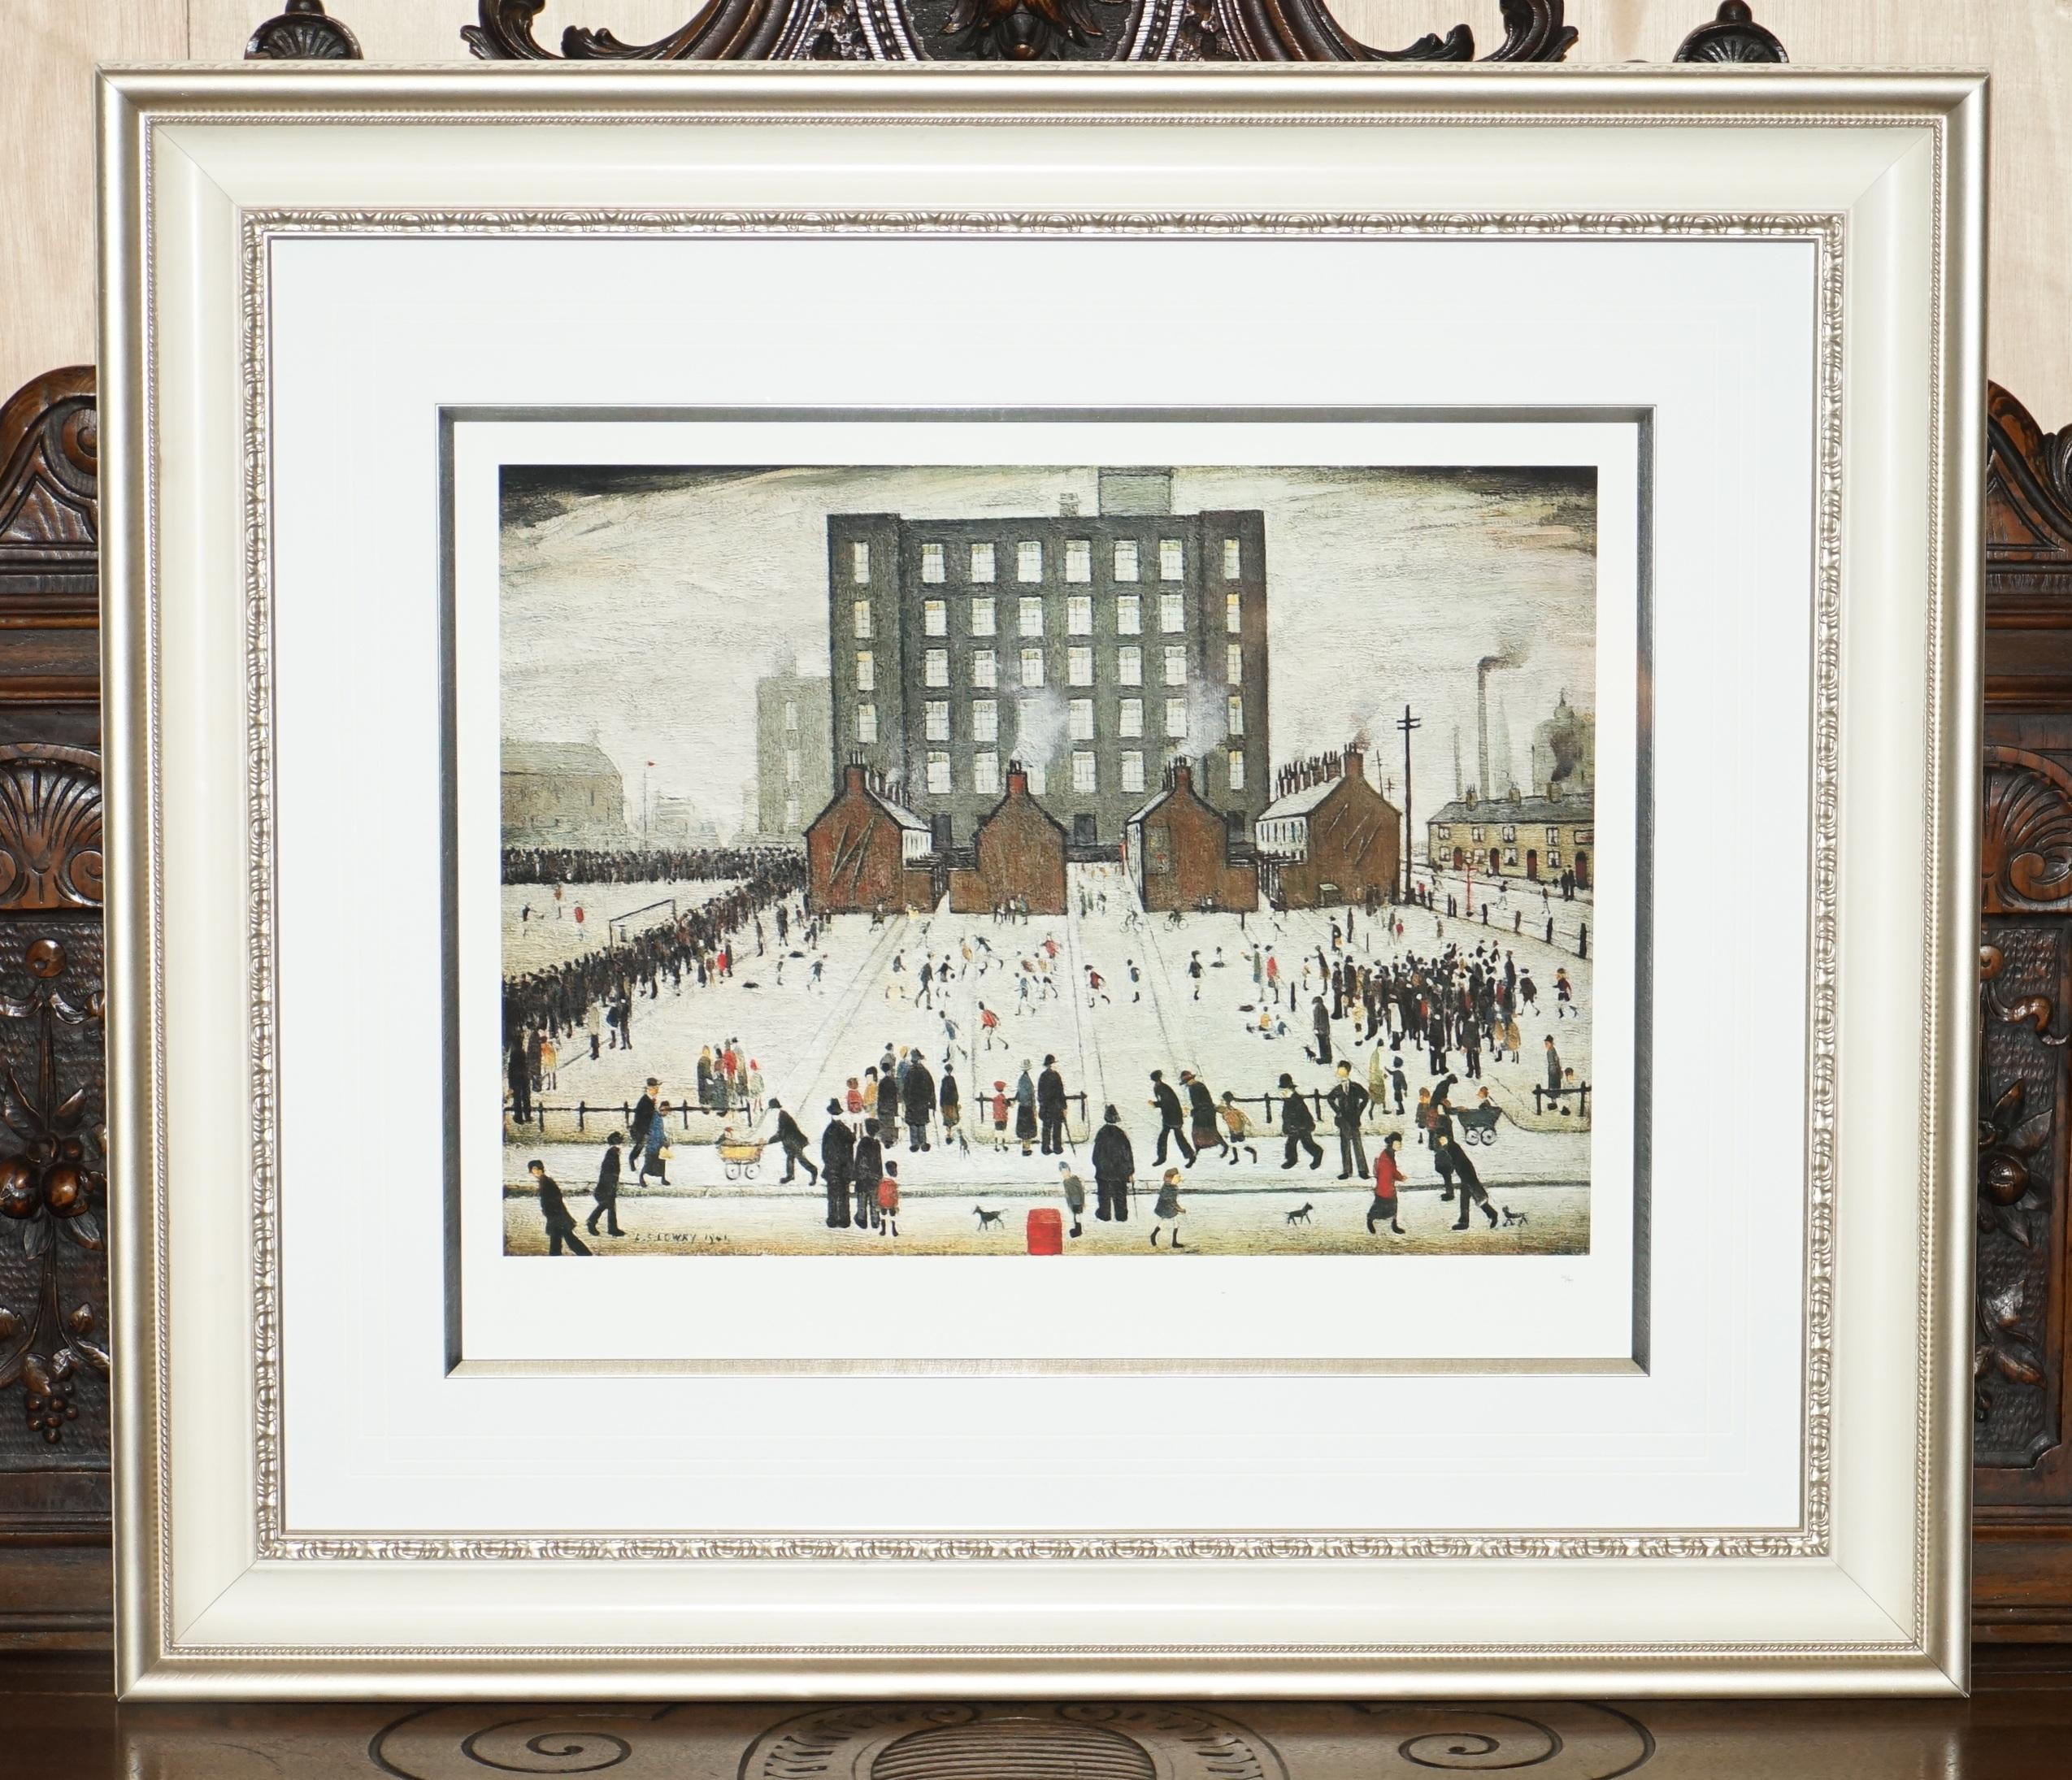 Royal House Antiques

Royal House Antiques is delighted to offer for sale this limited edition 60/99 print by L.S Lowry Print of 